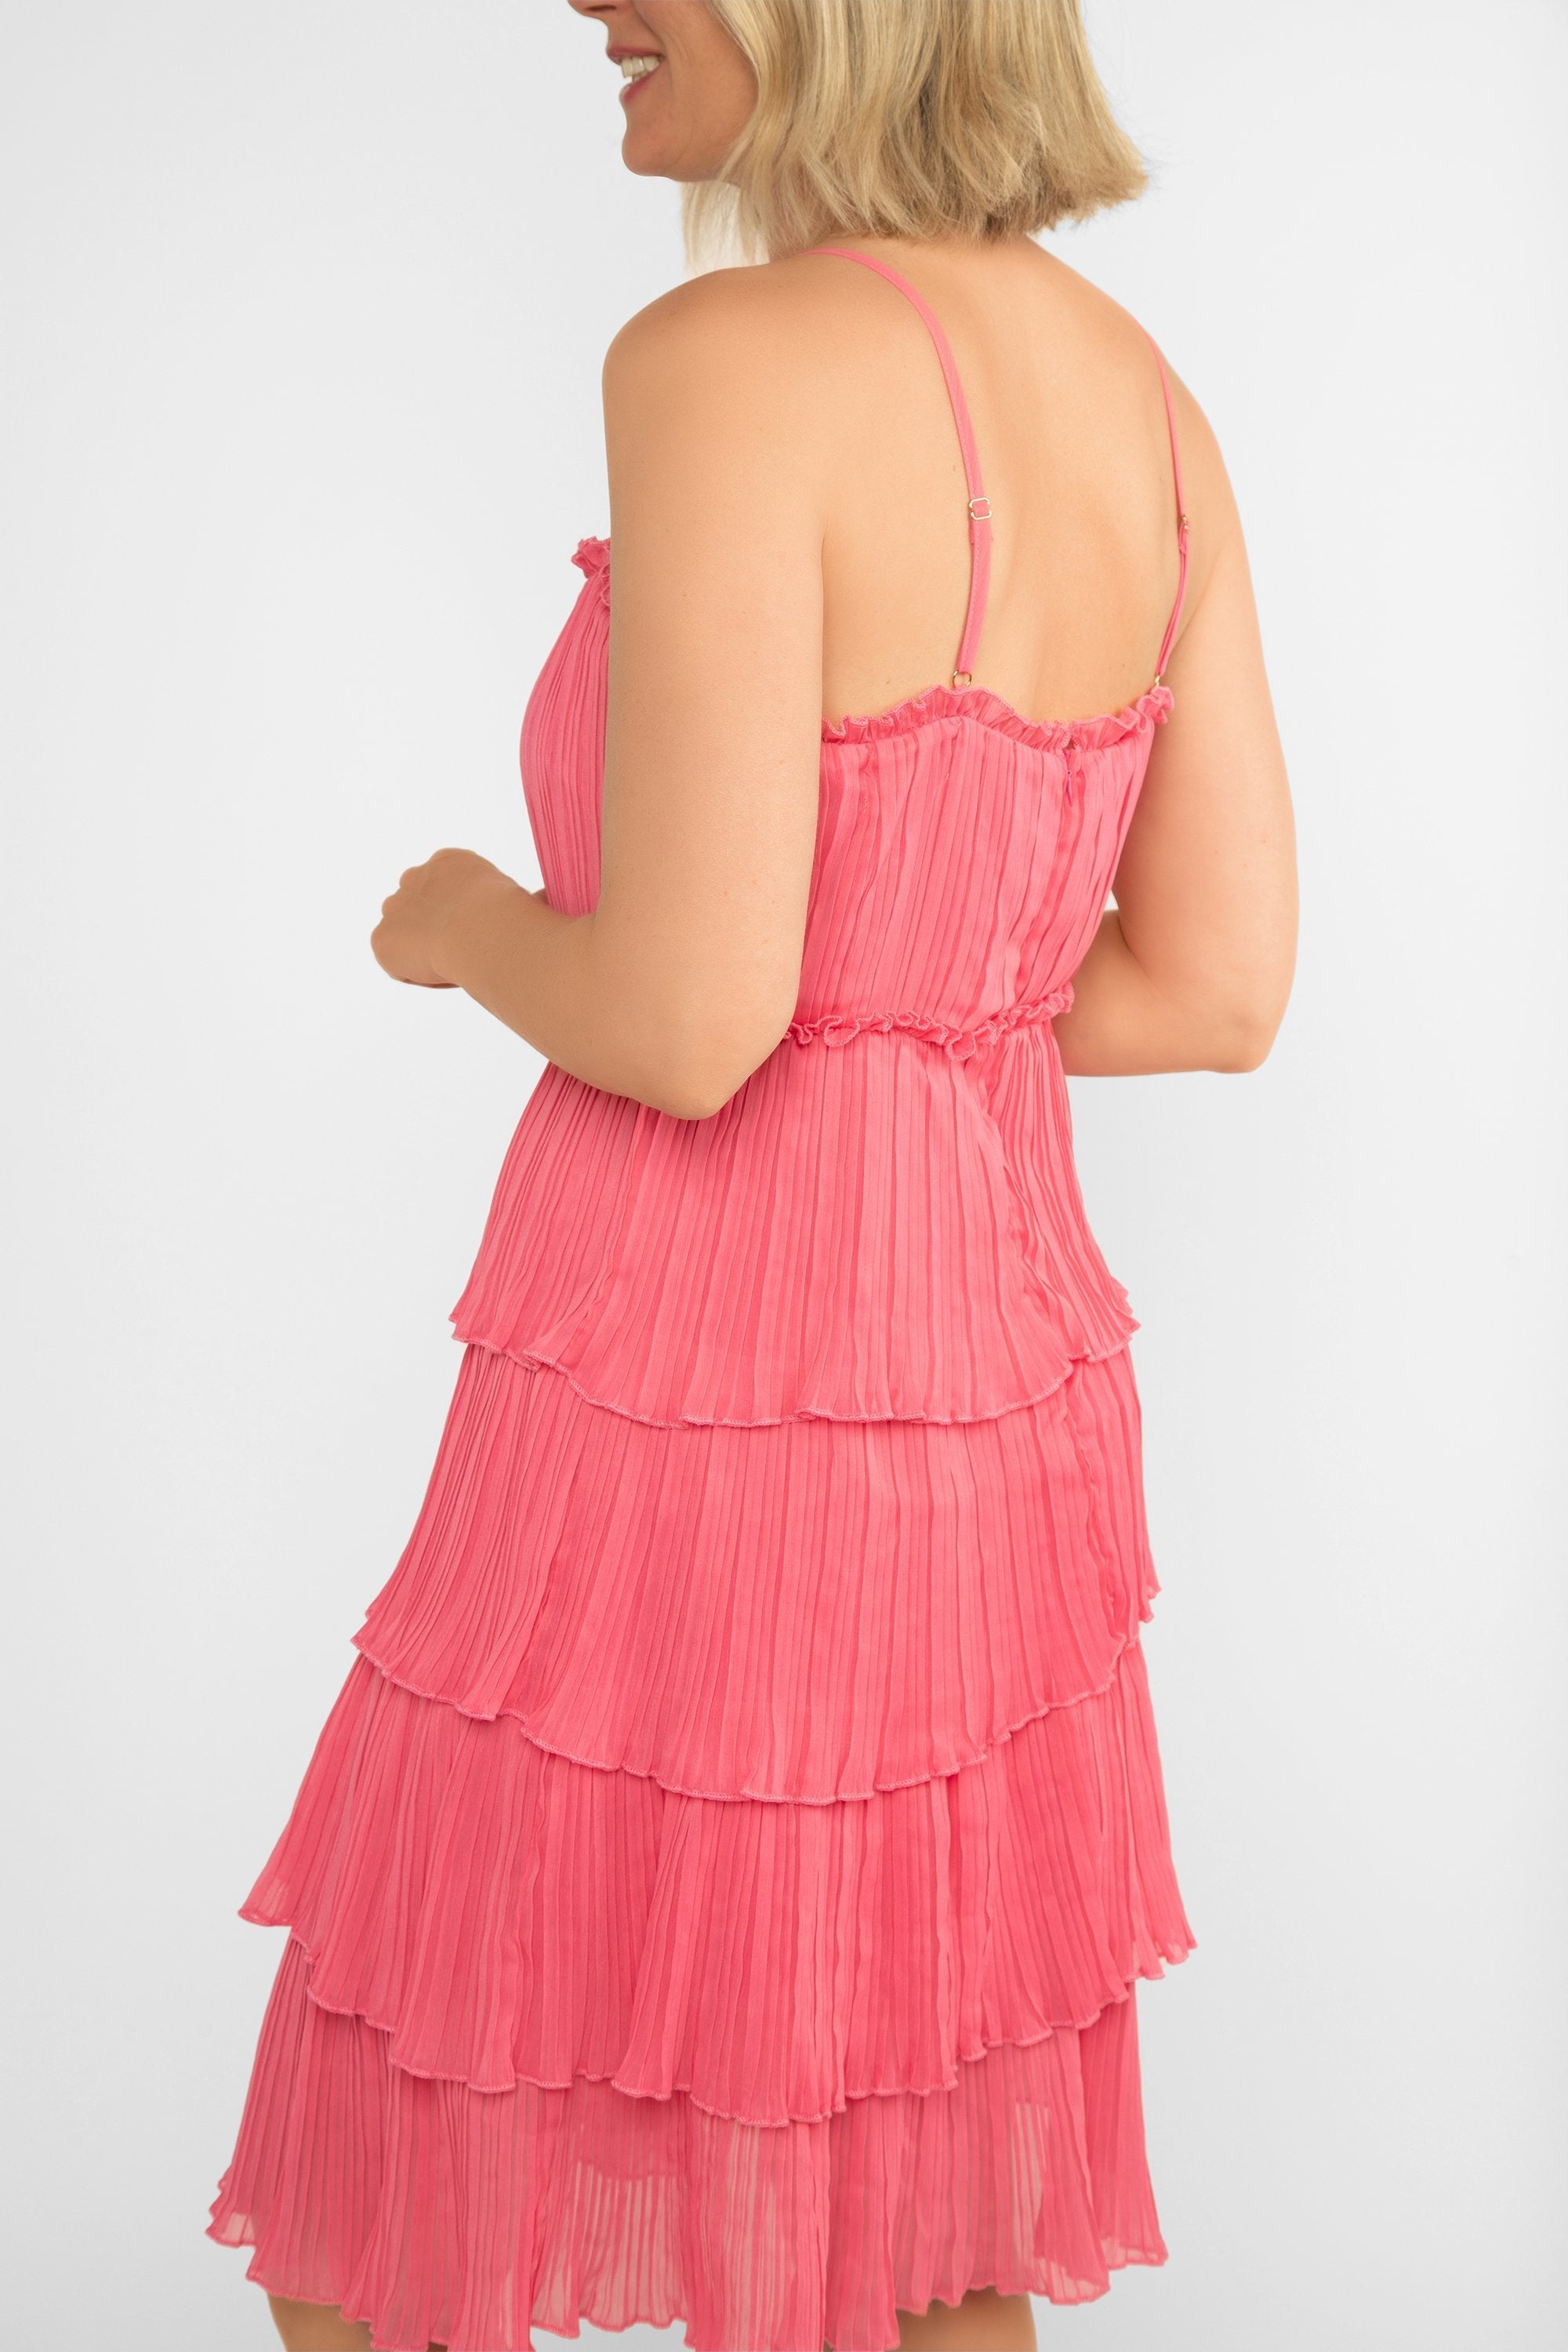 Back view of LATE (DR-6918391) Nikita Dress - Women's Sleeveless with Spaghetti Strap Knee Length Dress - lined pleated chiffon, layered knee length skirt in Pink